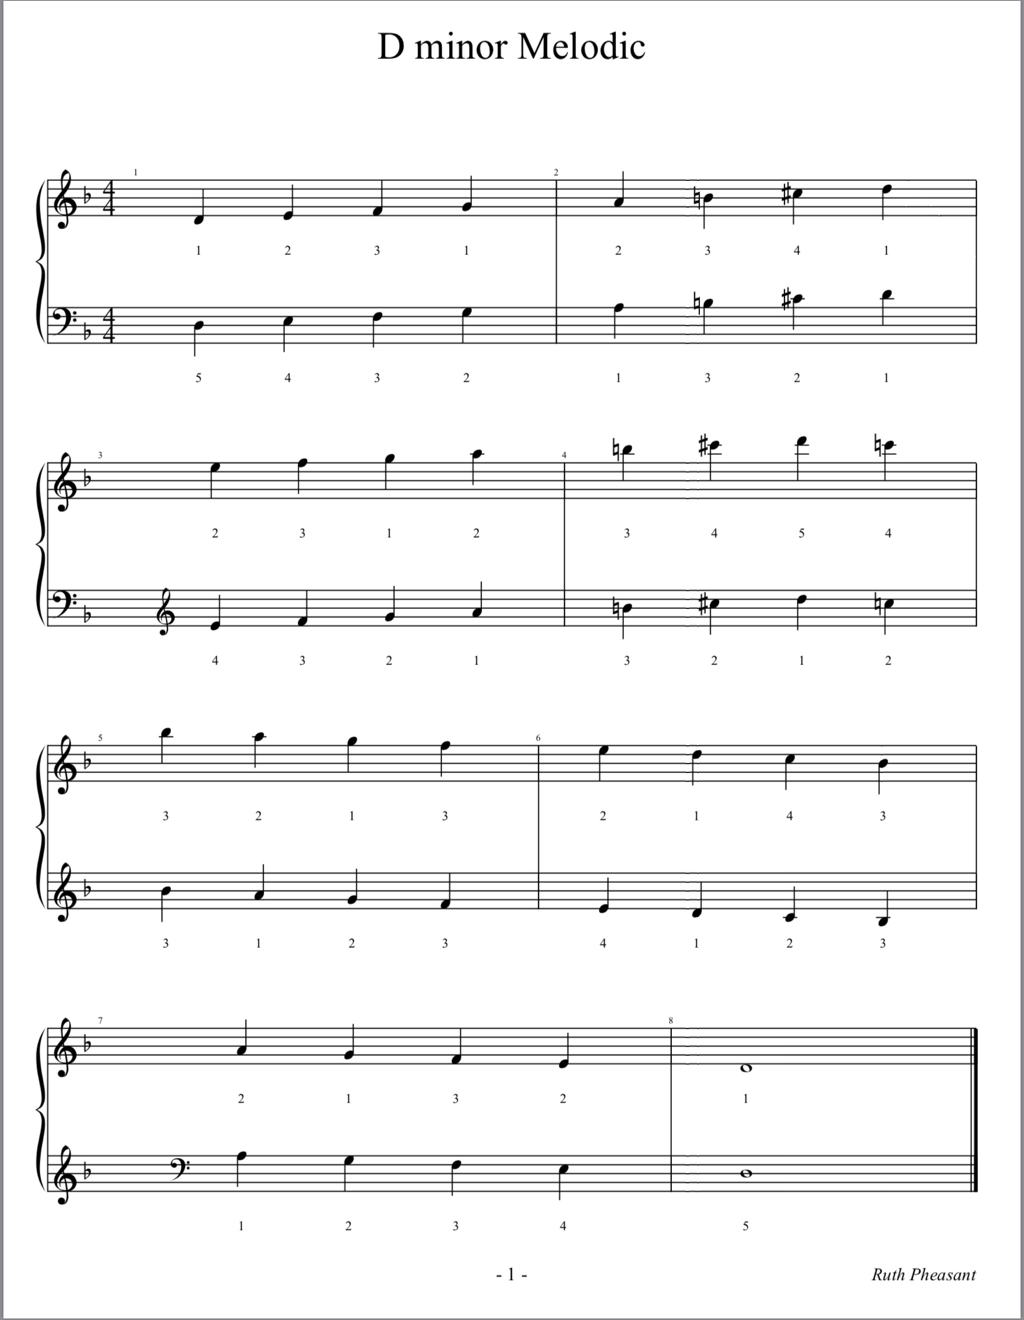 D Melodic Minor Sheet Music for Piano